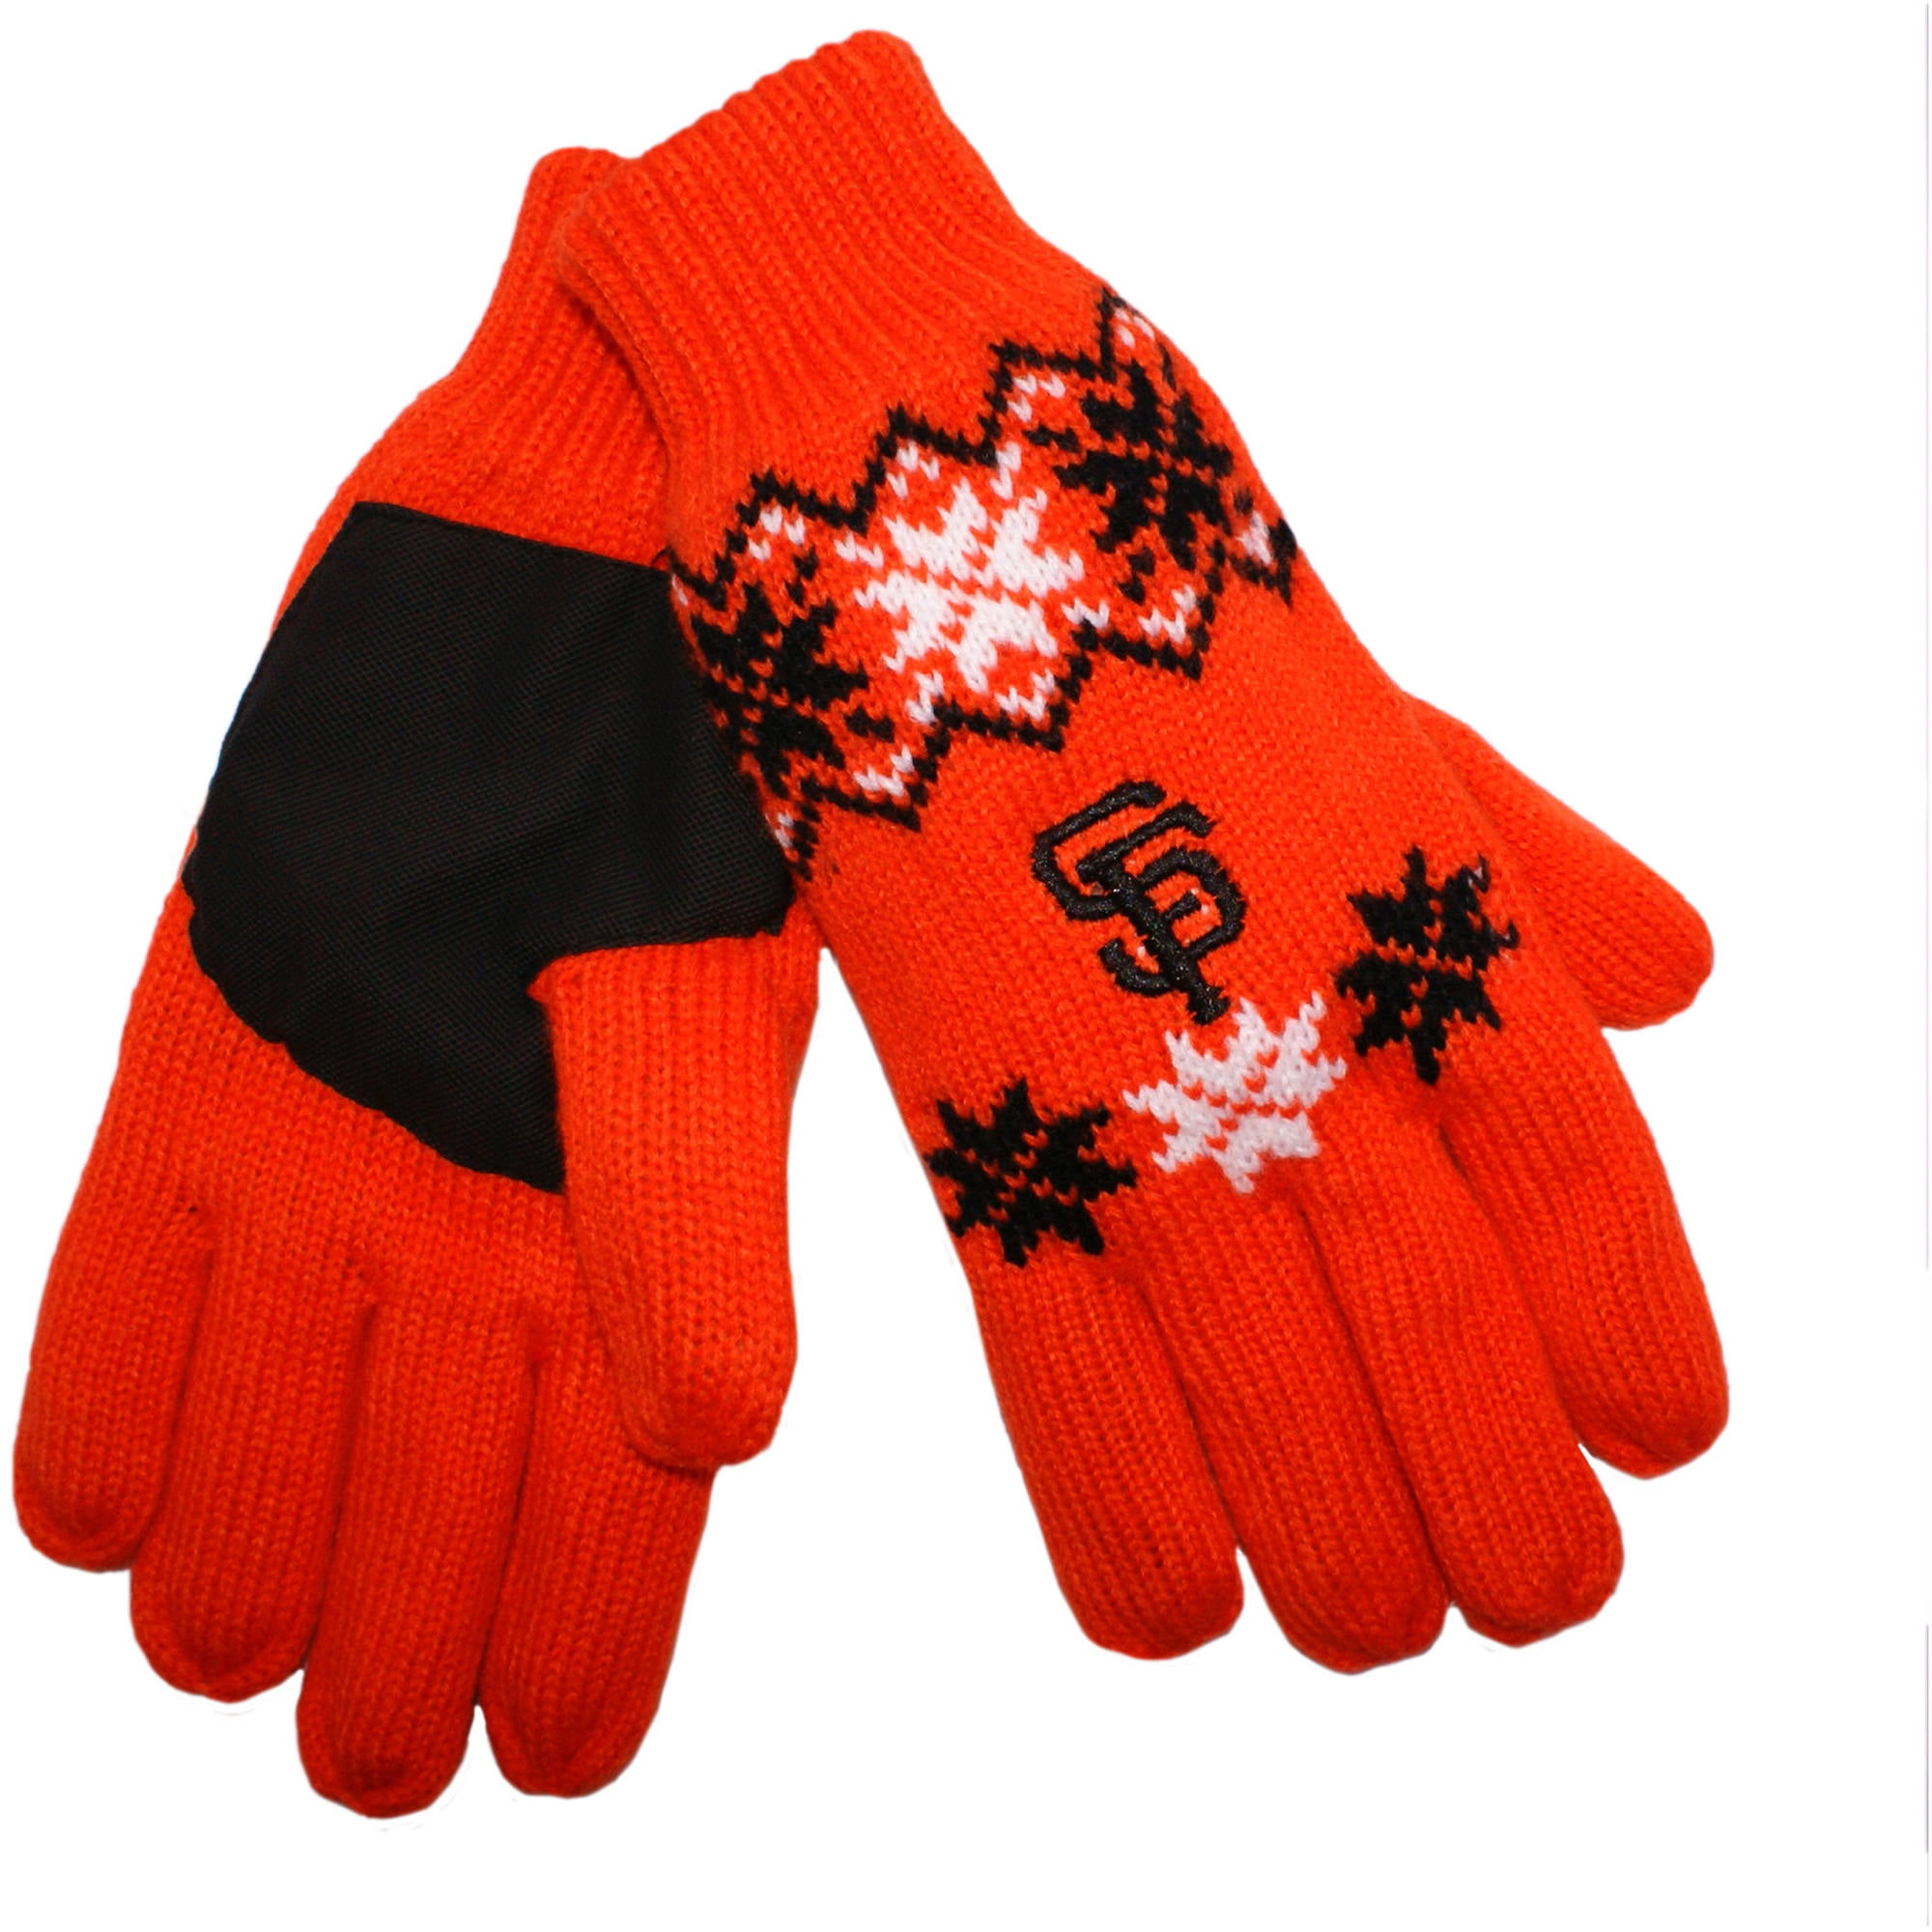 MLB Forever Collectibles Lodge Gloves, San Francisco Giants - Walmart.com